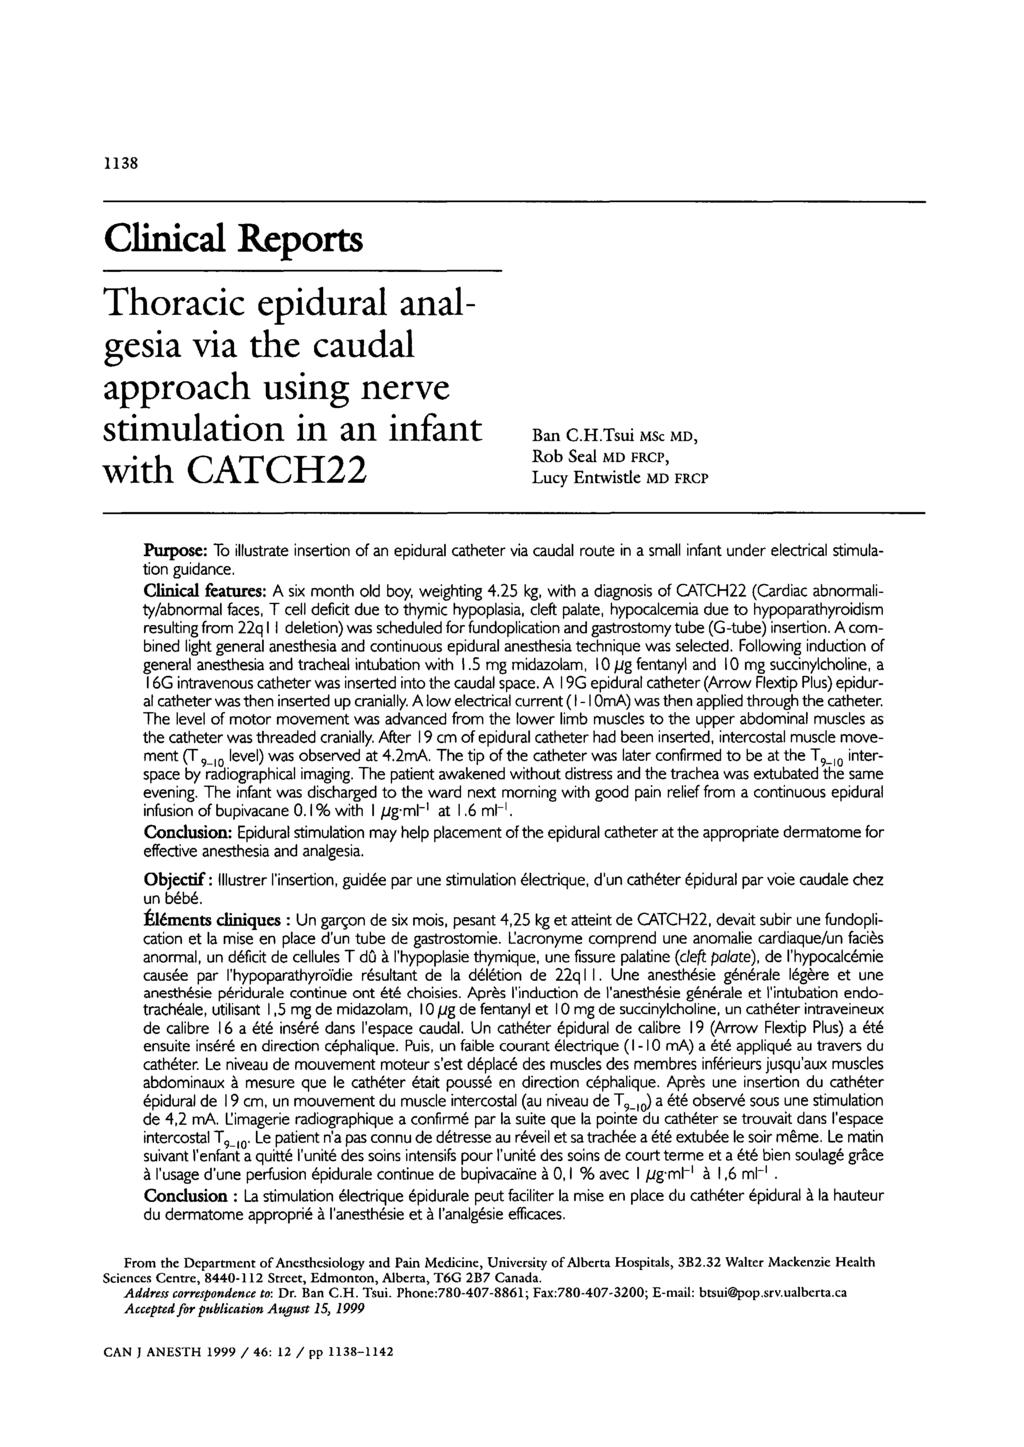 1138 Clinical Reports Thoracic epidural analgesia via the caudal approach using nerve stimulation in an infant with CATCH2